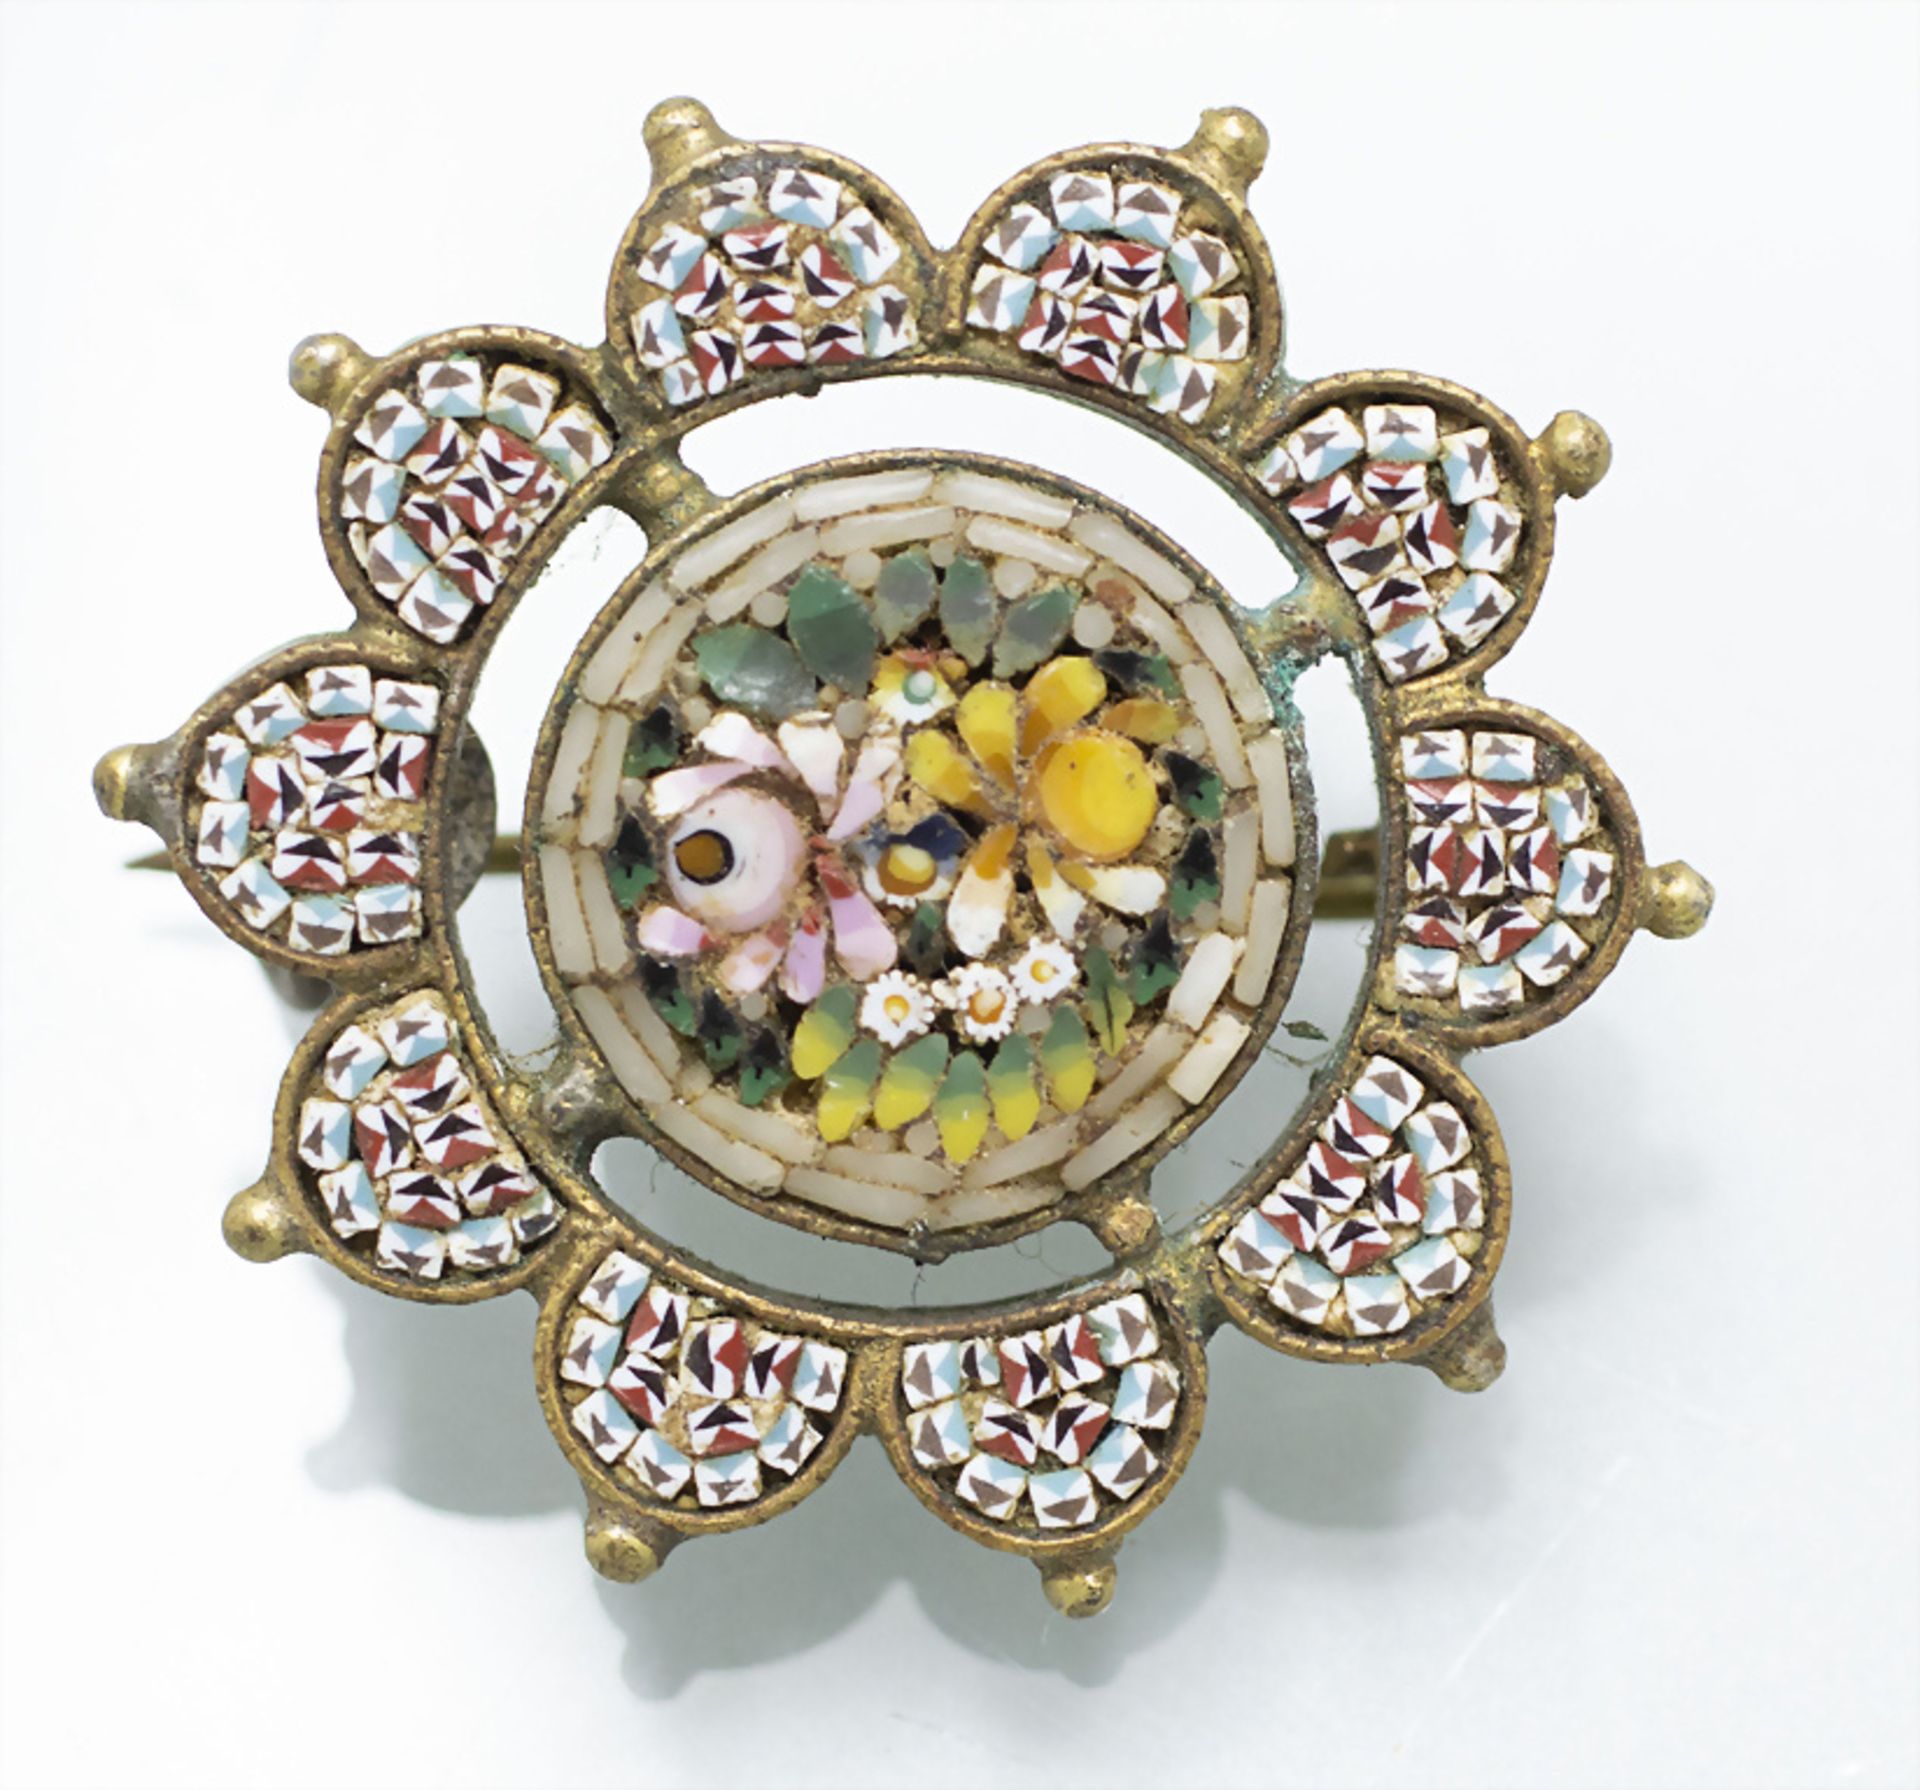 Mikromosaik-Brosche / A micro mosaic brooch with flowers, Italien, Ende 19. Jh.